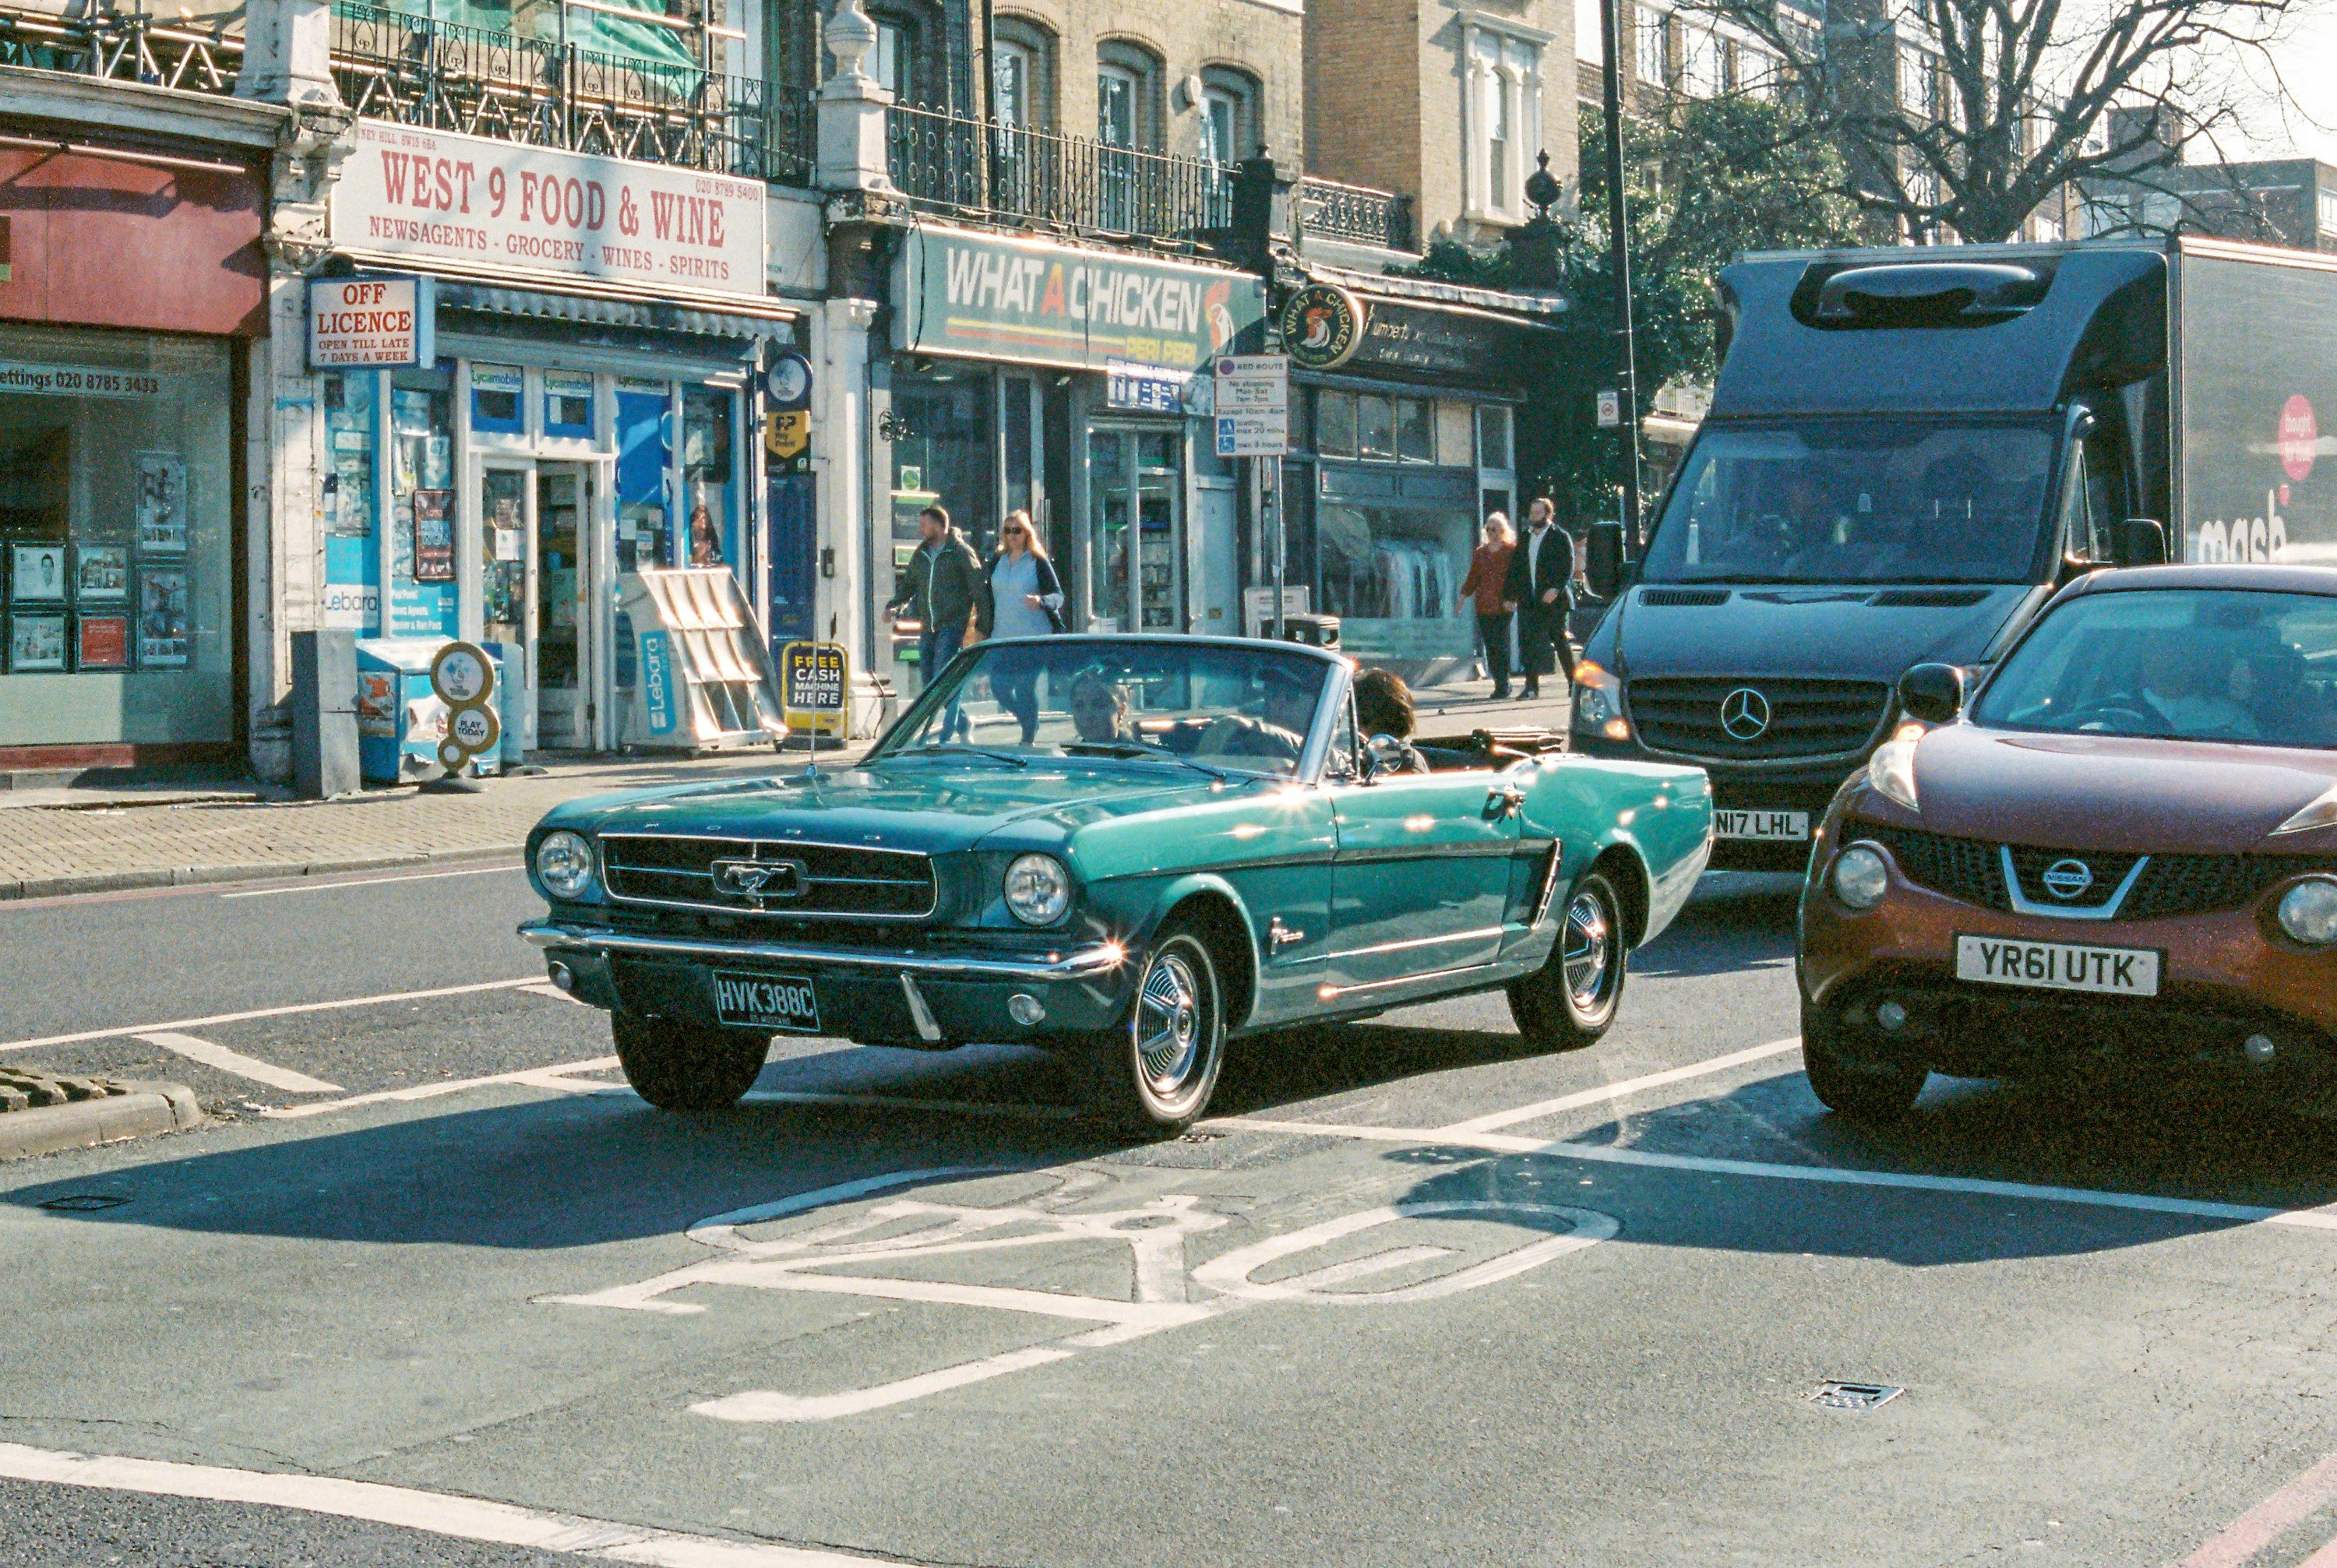 teal classic car on road during daytime